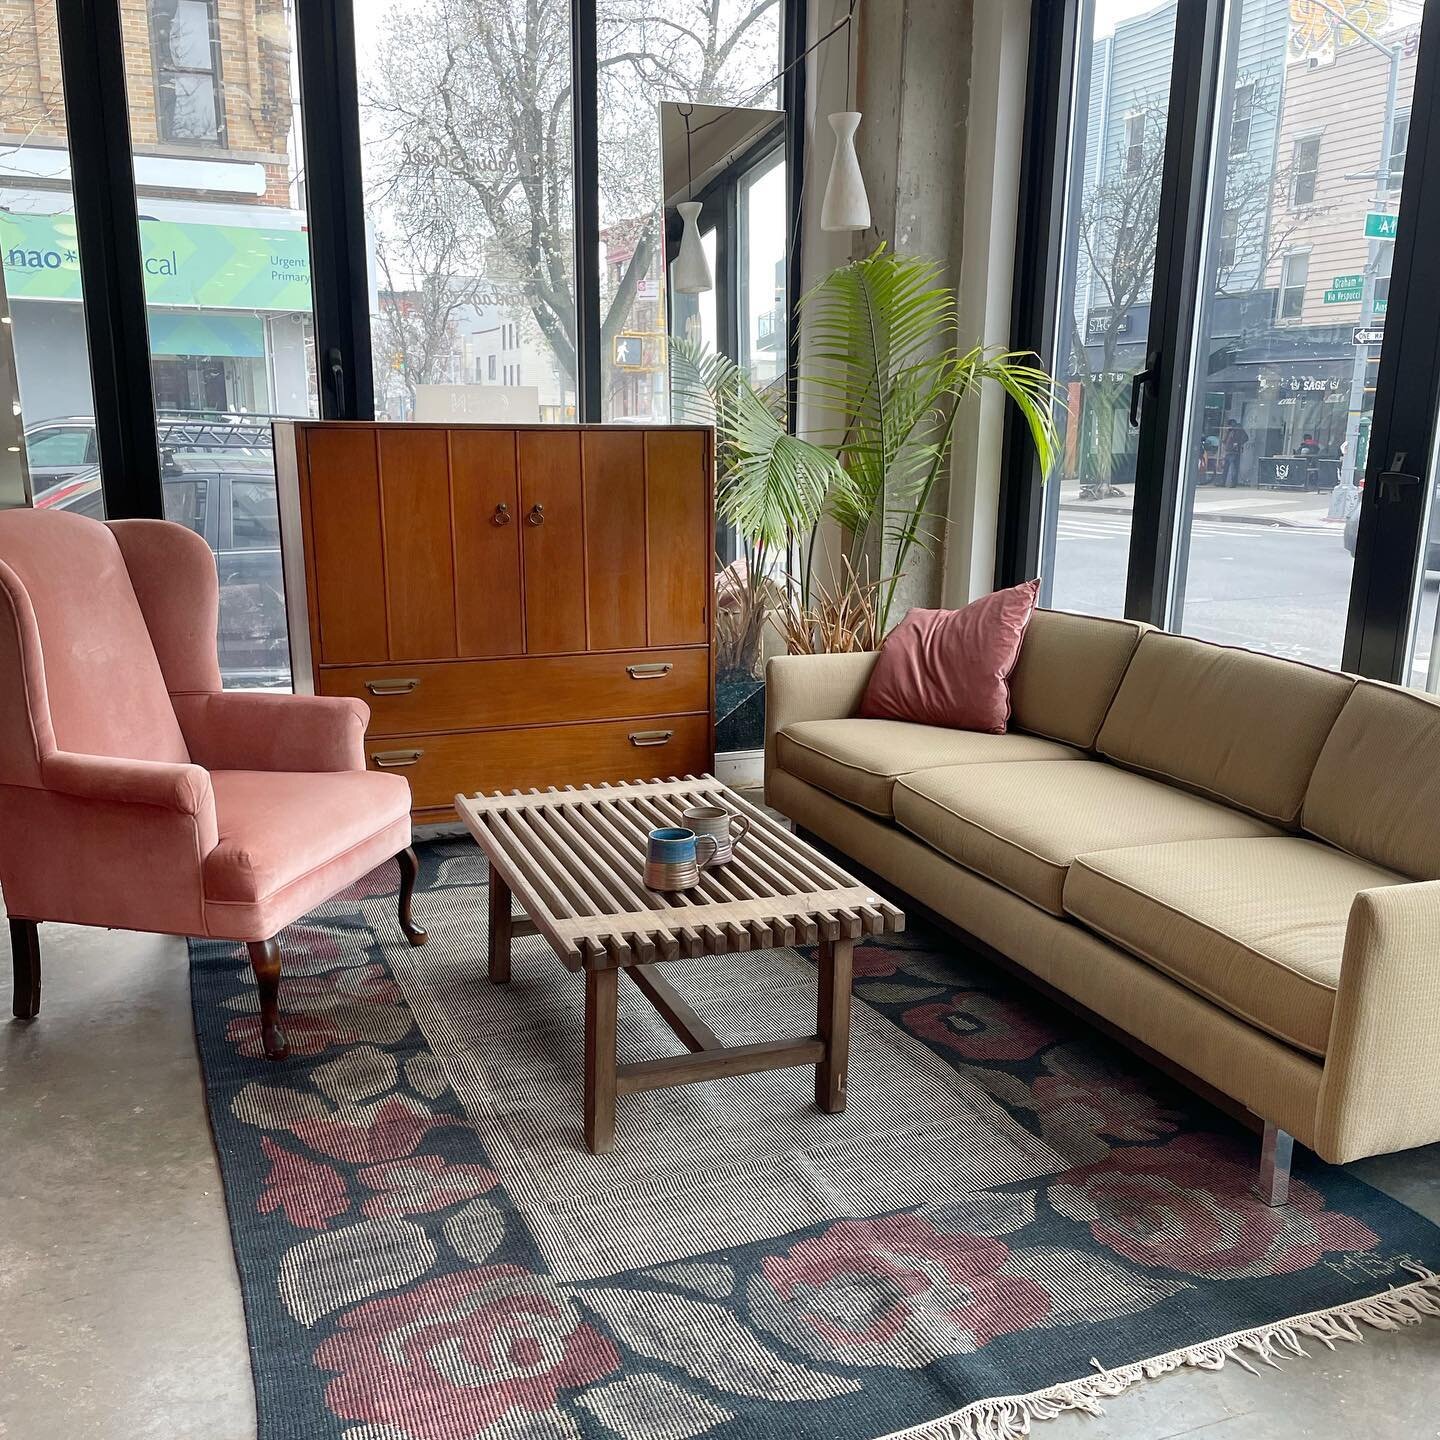 Friday night drop in Williamsburg 🪷

Sage green mid-century wood and chrome base sofa (85&rdquo;l x 25&rdquo;t x 33&rdquo;d): SOLD
Mid-century tallboy (44&rdquo;w x 47&rdquo;t x 20&rdquo;d): SOLD
Wool floral area rug (6&rsquo; x 9&rsquo;): $350
Hand